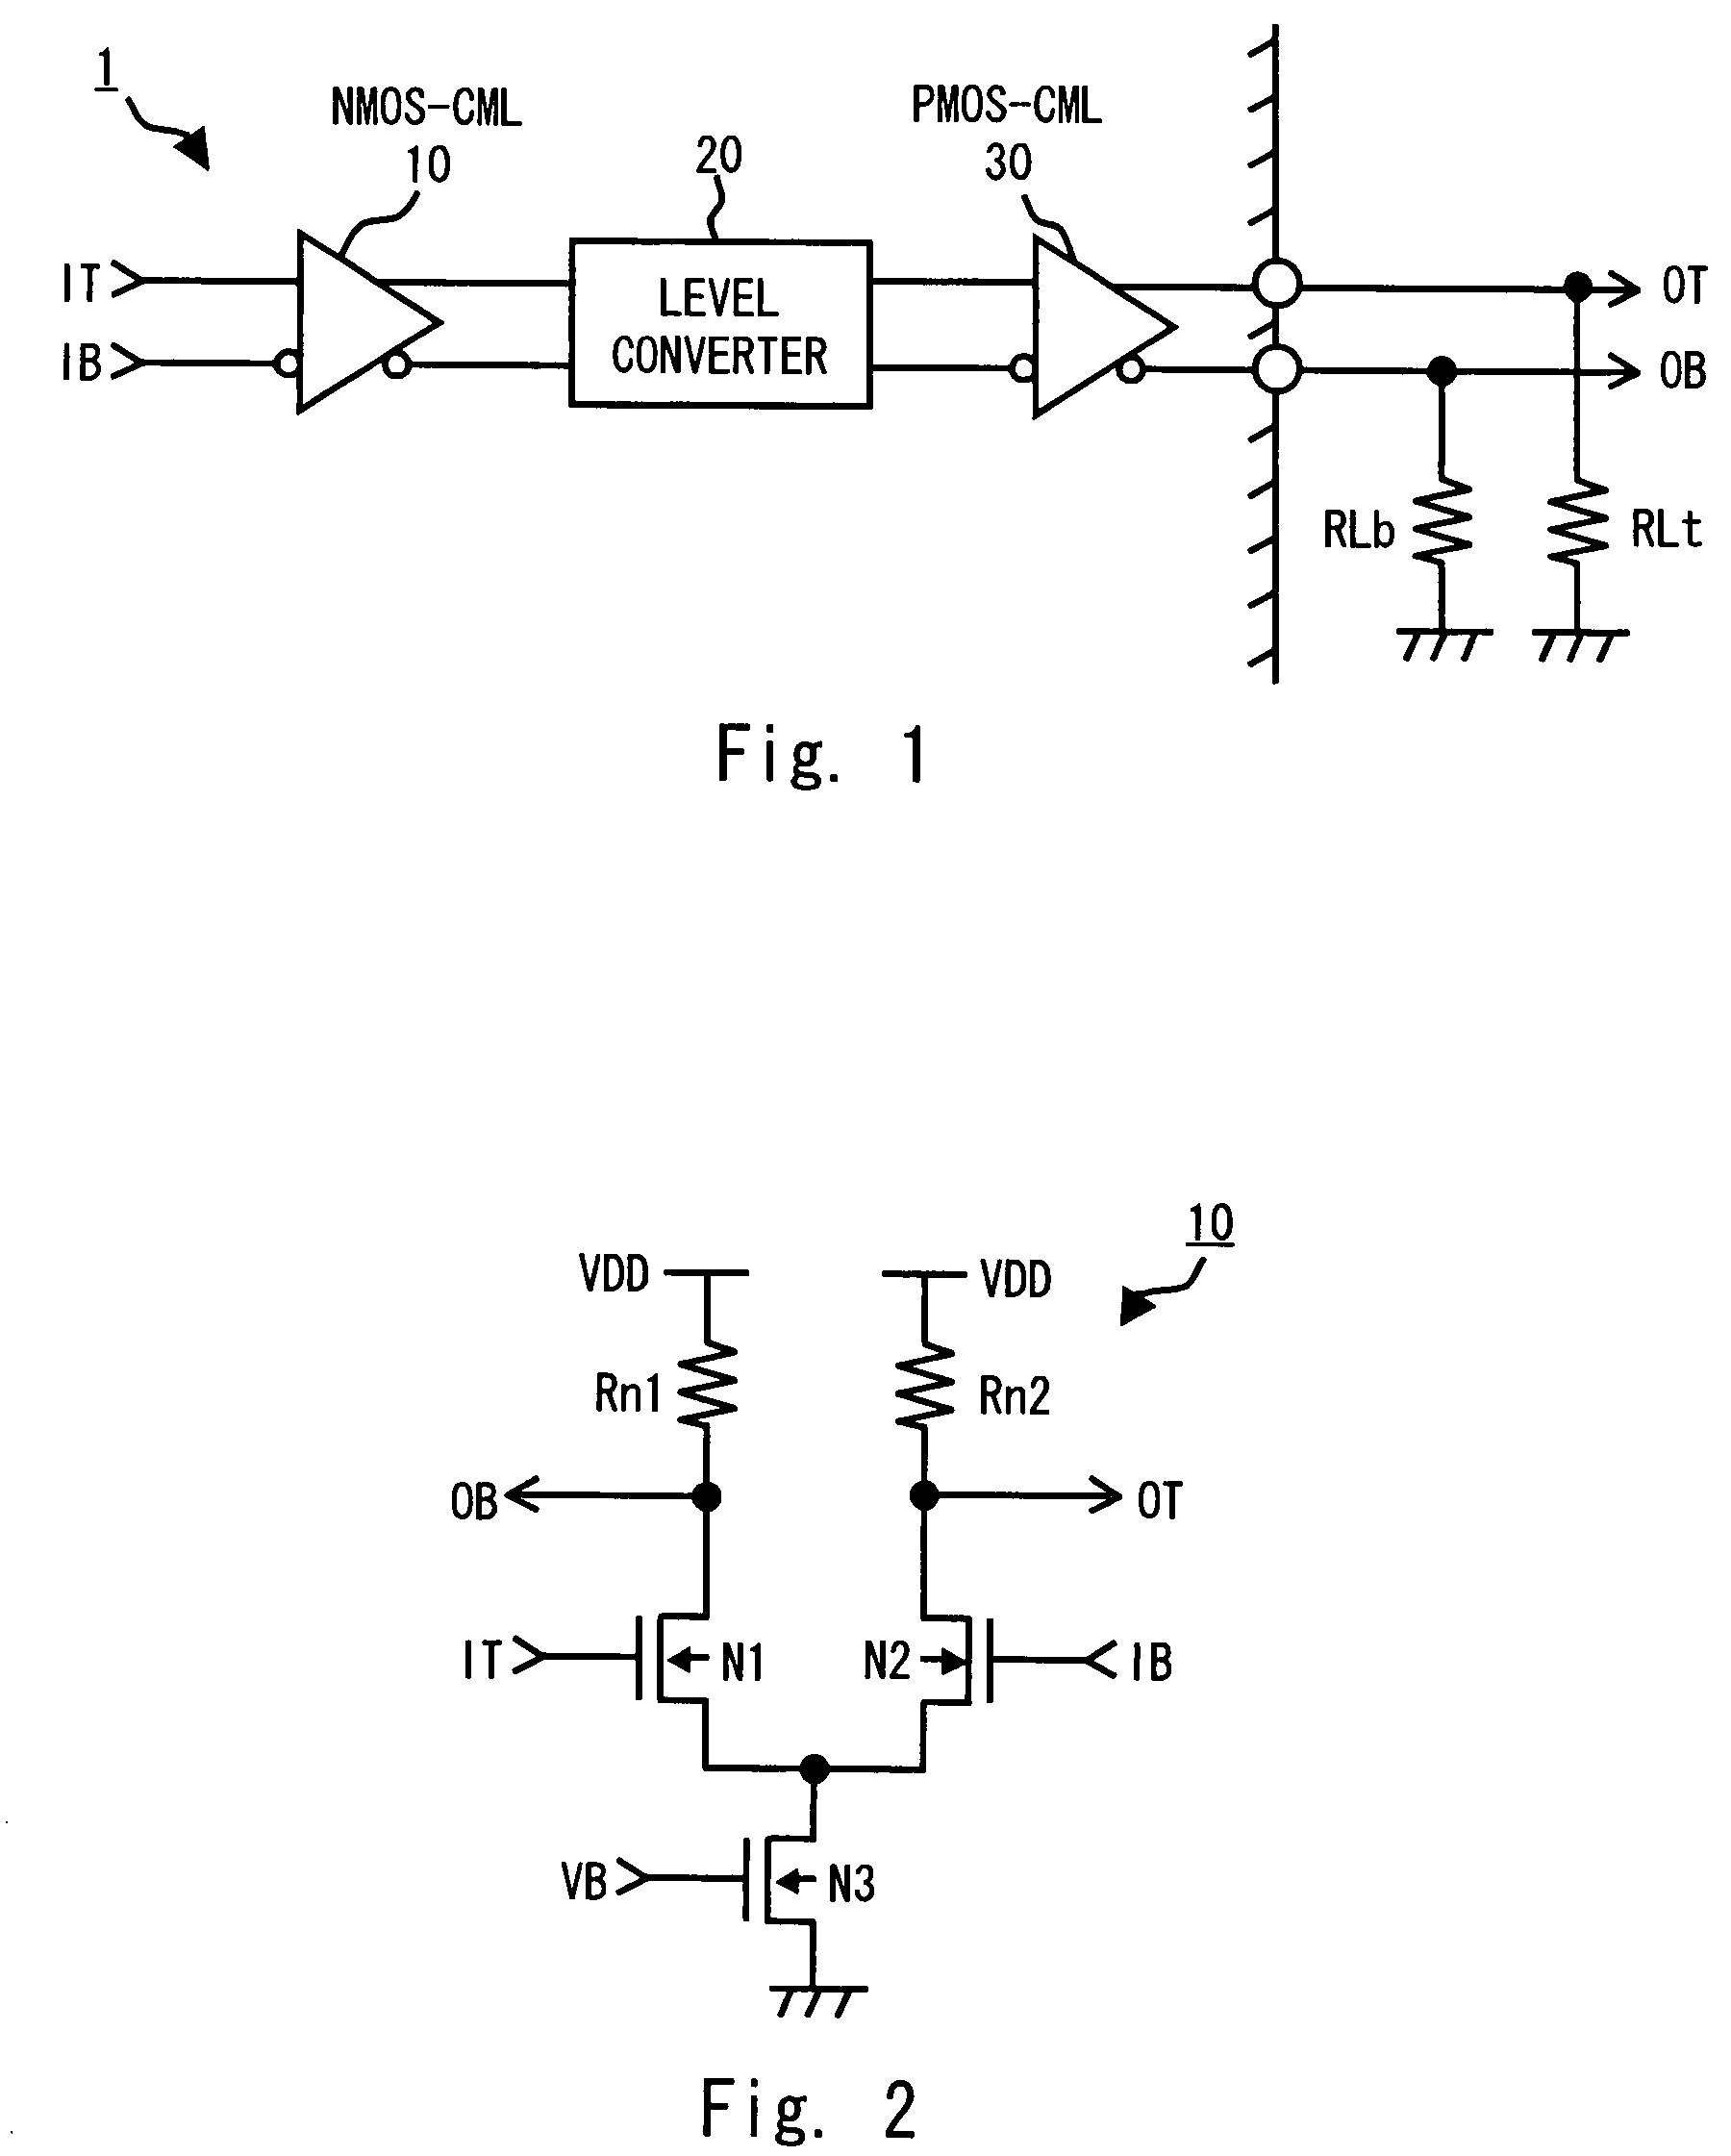 Level converter and semiconductor device